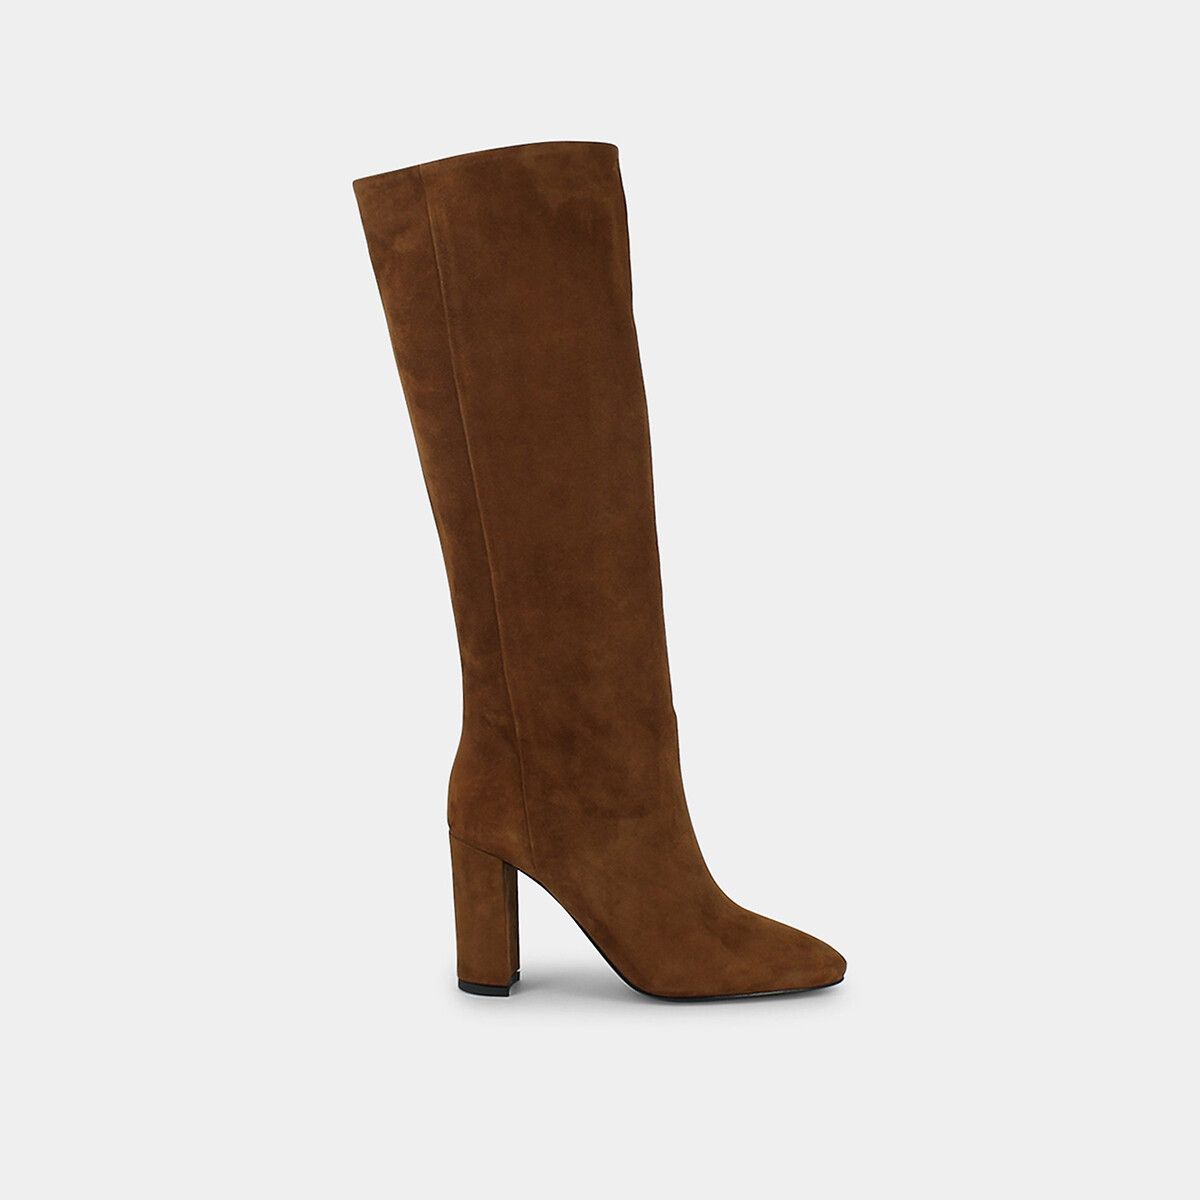 Calime Suede Knee-High Boots | La Redoute (UK)